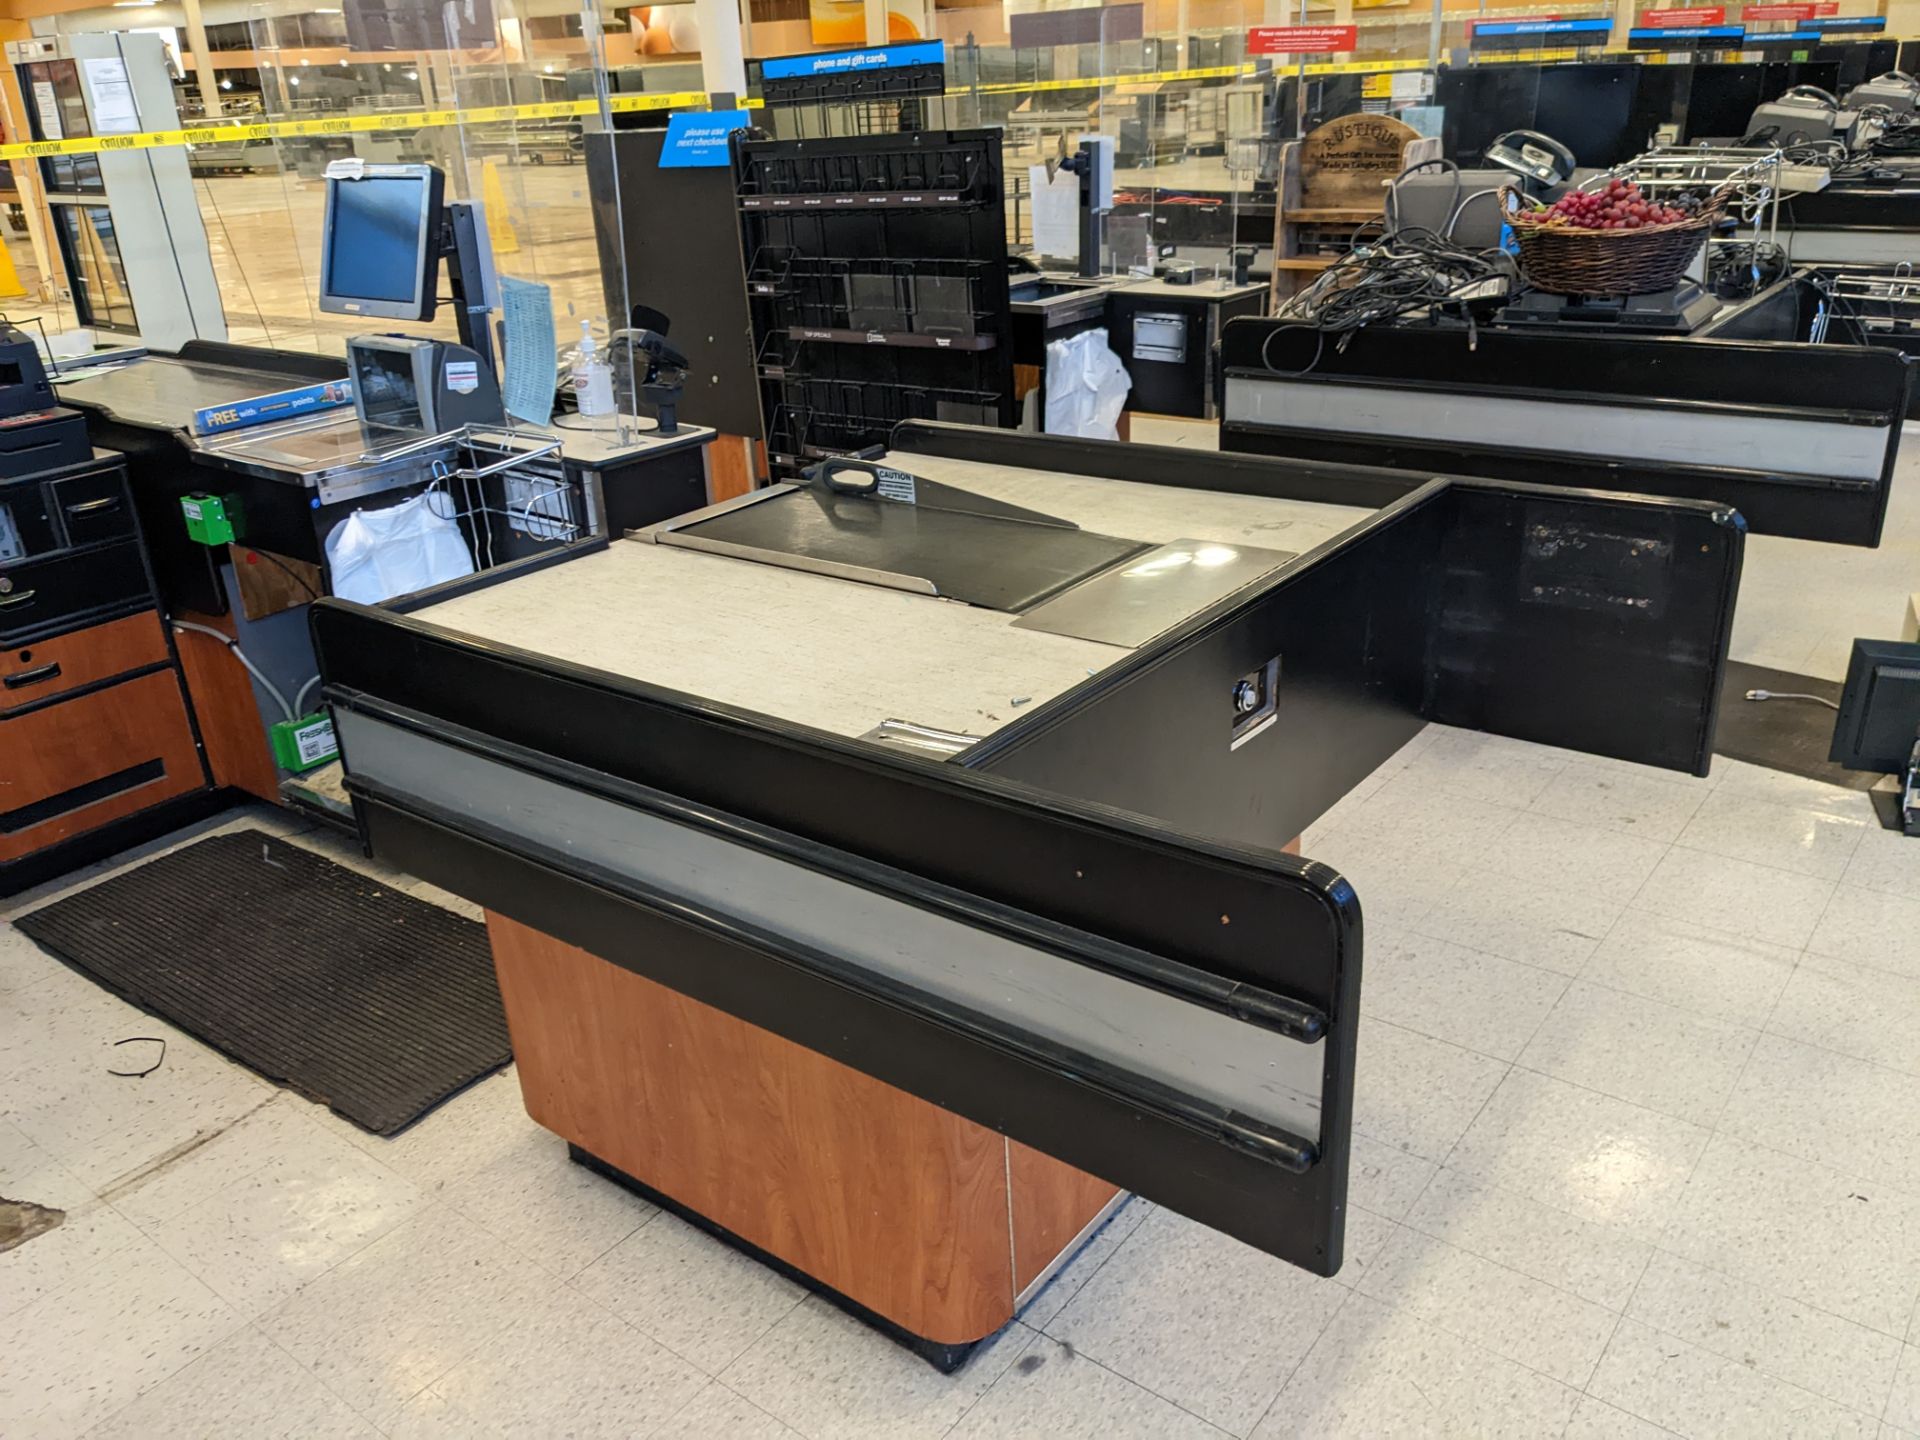 2 Piece Check Out Counter with Conveyor Scanner and Scale